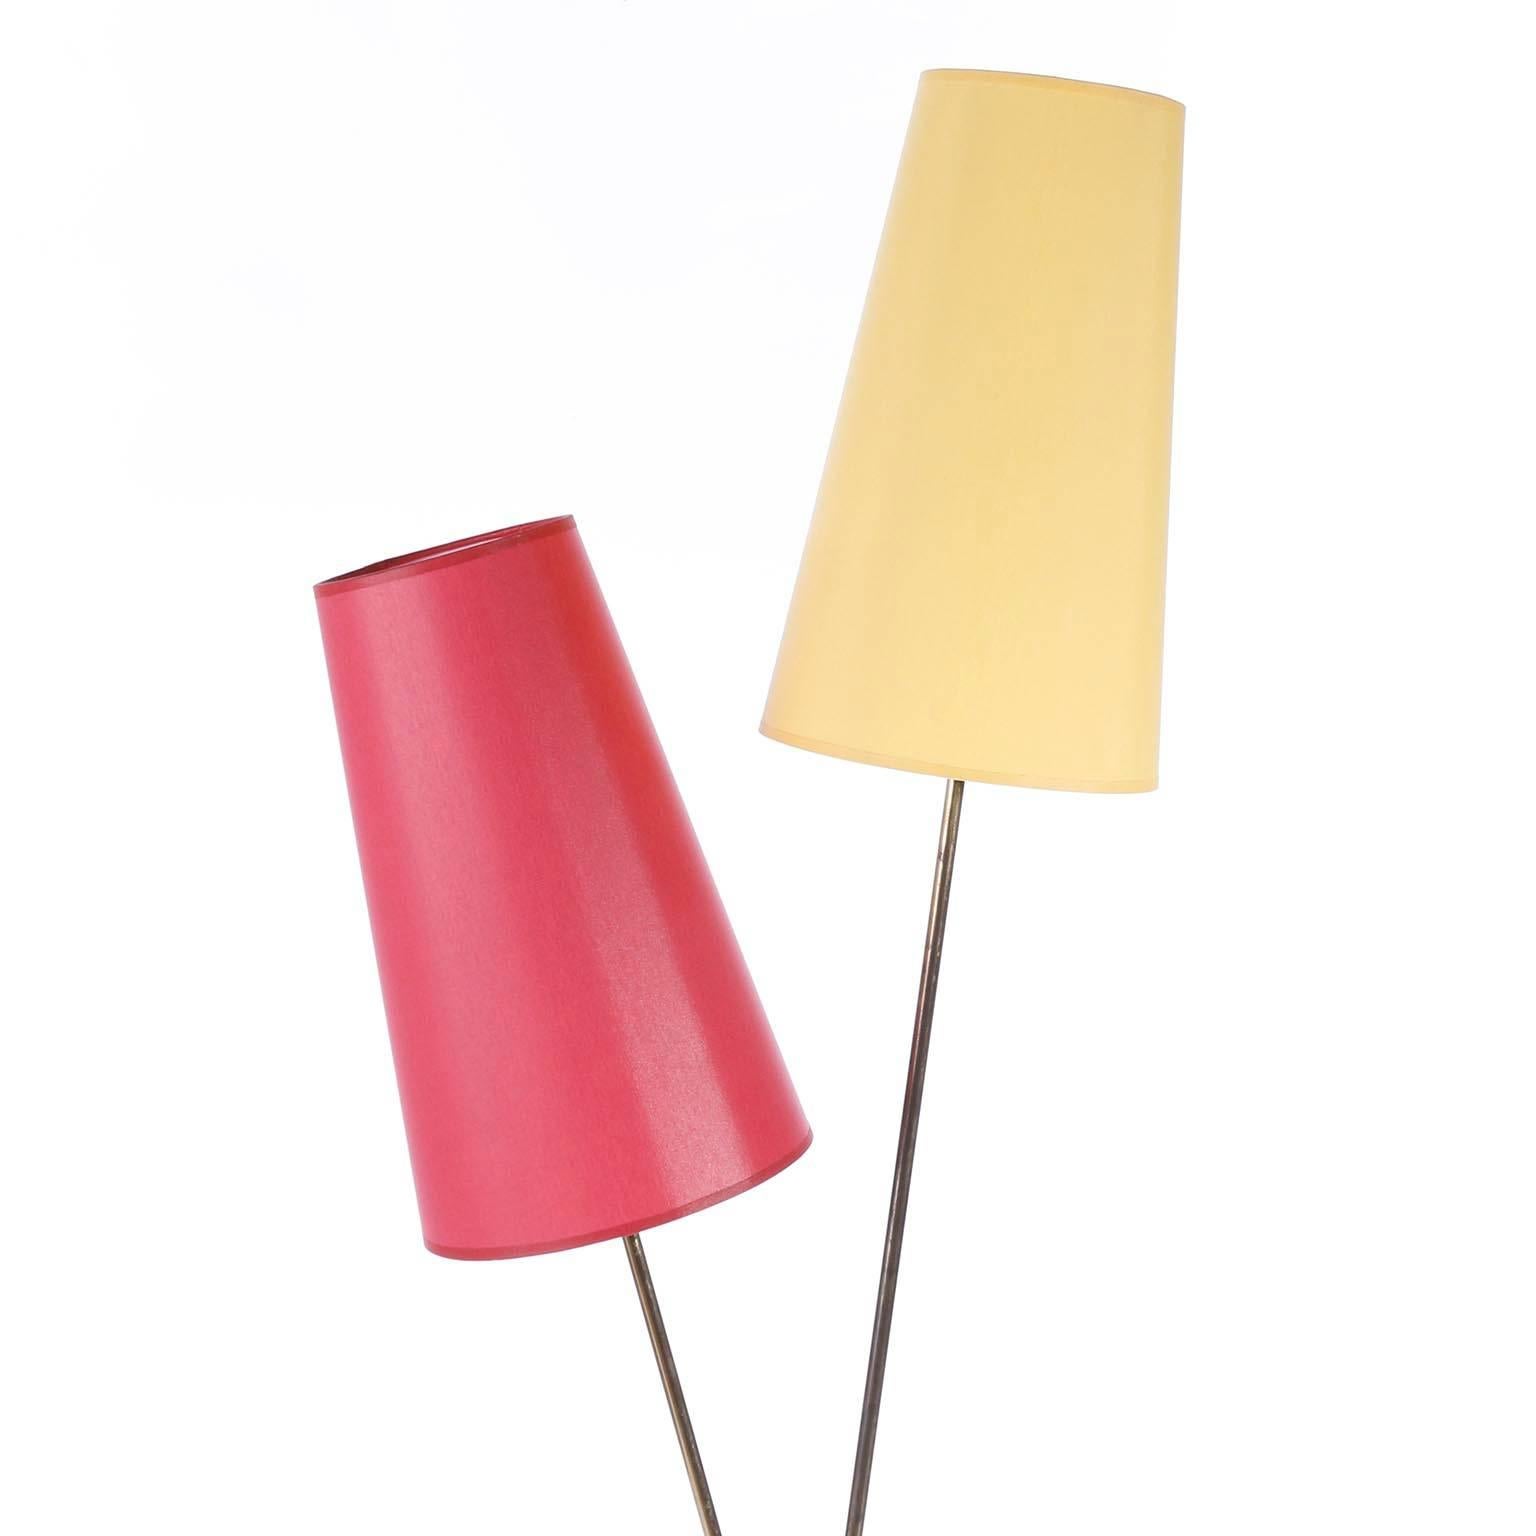 A floor lamp by Rupert Nikoll, Vienna, Austria, manufactured in midcentury, circa 1960 (late 1950s or early 1960s).
The lamp shades have been renewed on base of the original ones.